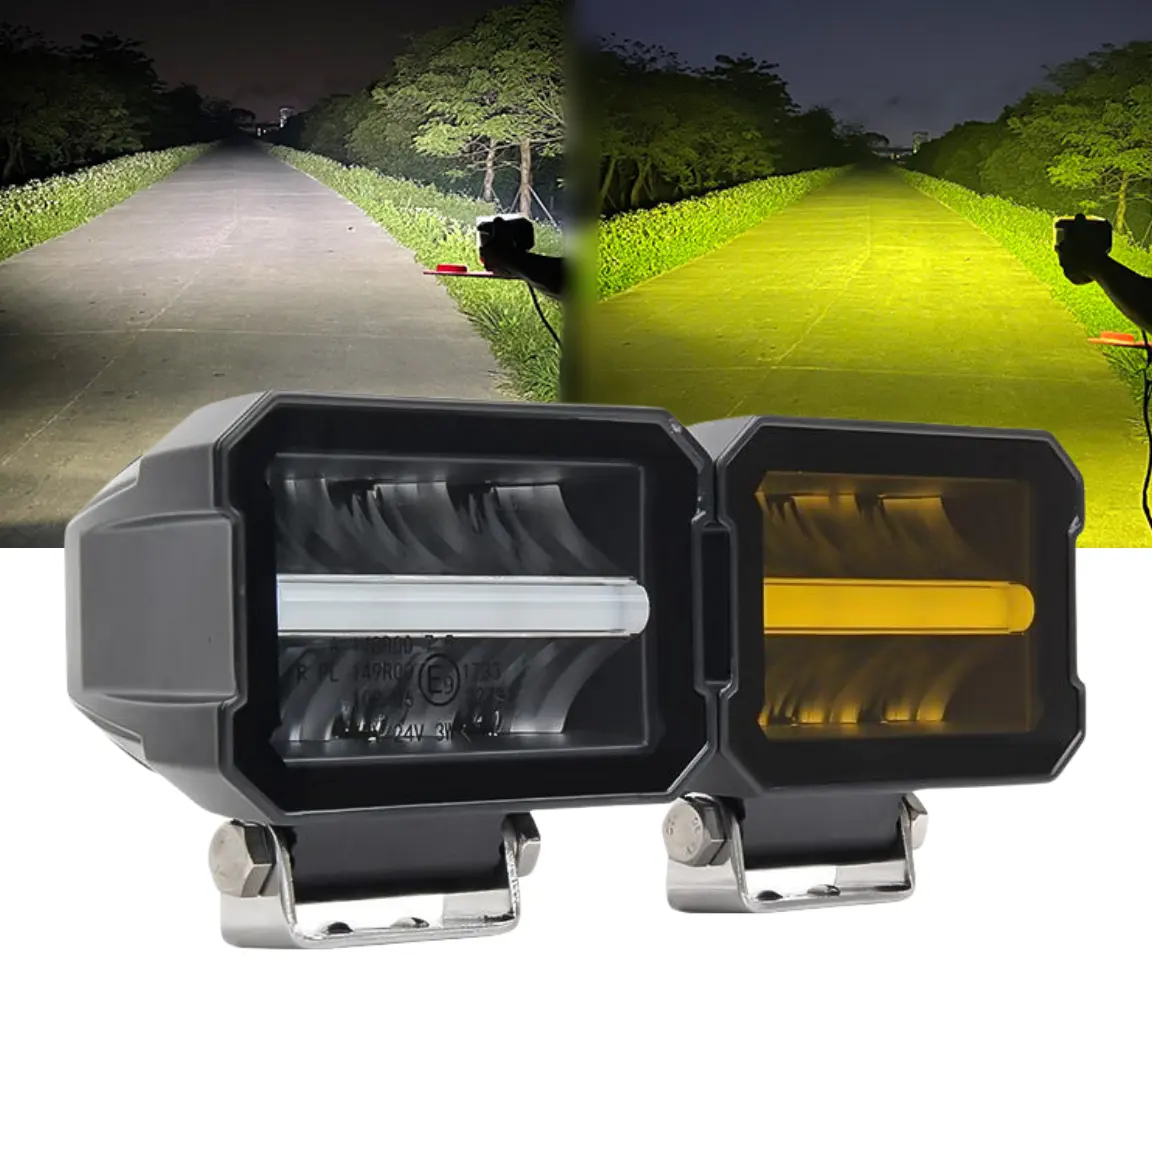 3.6inch 30W 2200LM Super Bright Led Work Light Dual Lens DRL Auxiliary Fog Driving Lights For Universal Car Truck Vehicle